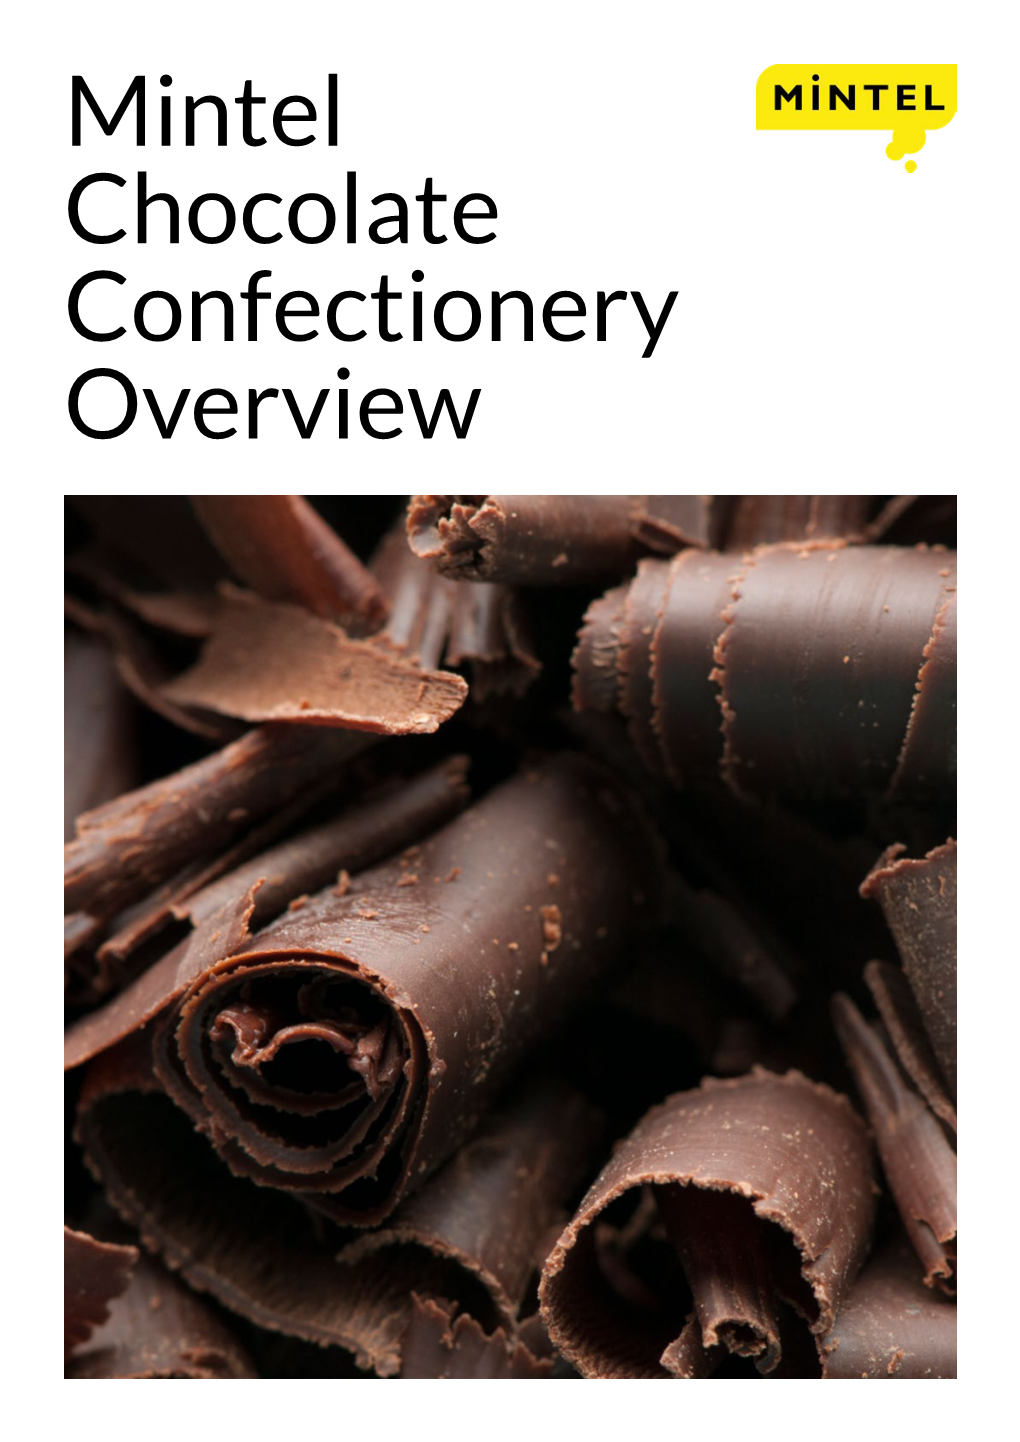 Mintel Chocolate Confectionery Overview CONDITIONS of USE